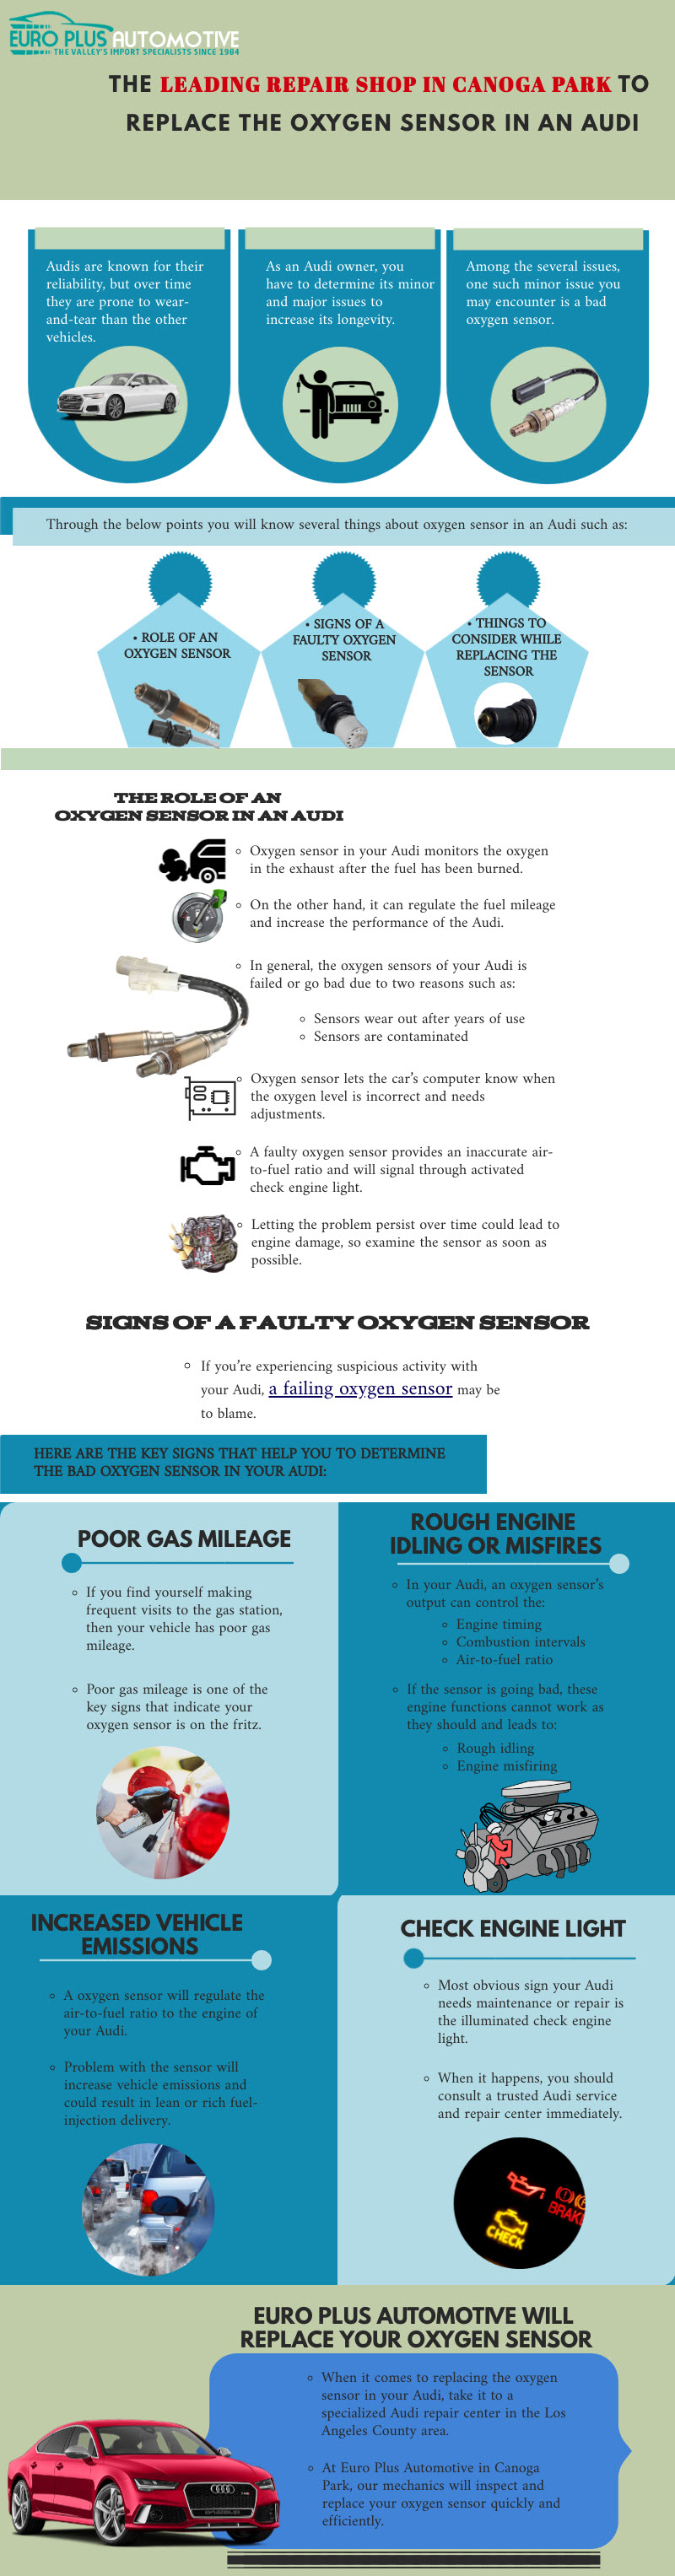 Audi Faulty Oxygen Sensor Signs & Replacement